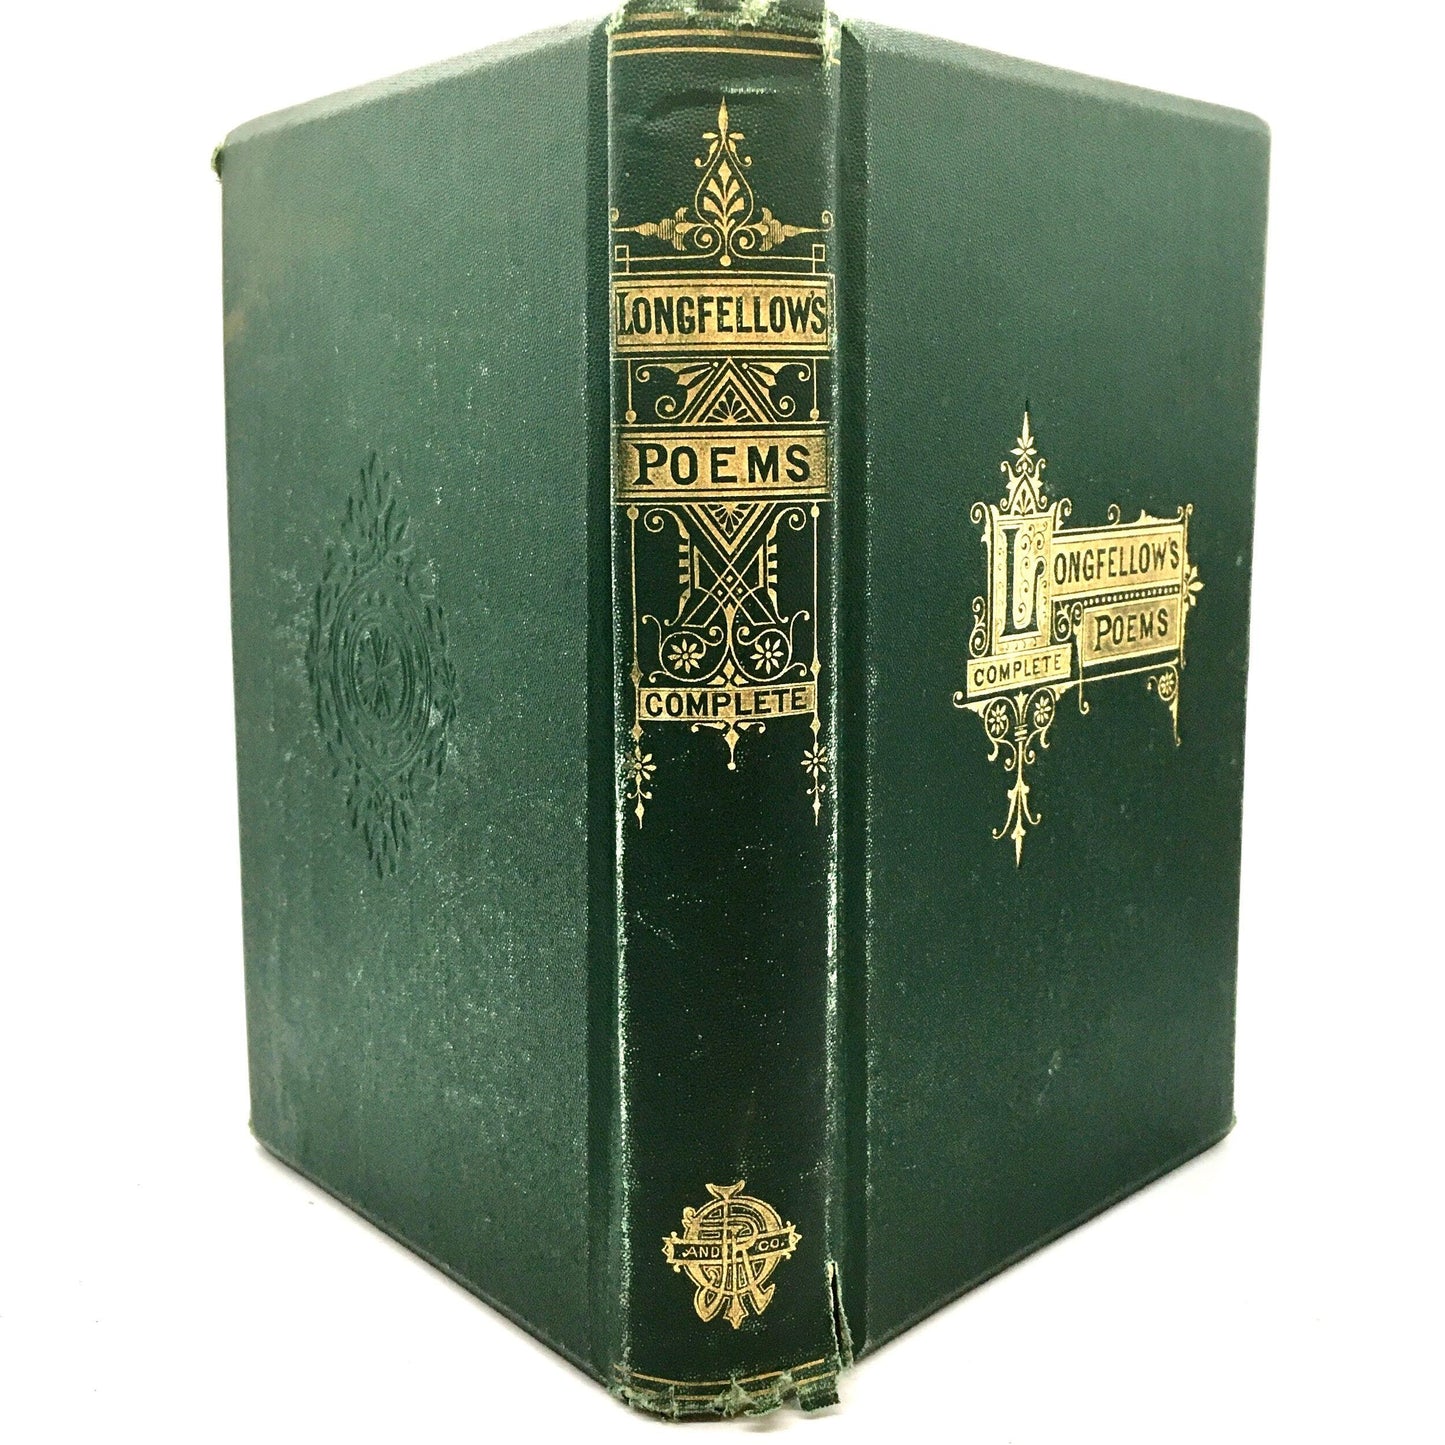 LONGFELLOW, Henry Wadsworth "The Poetical Works" [James R. Osgood, 1874] (Signed) - Buzz Bookstore